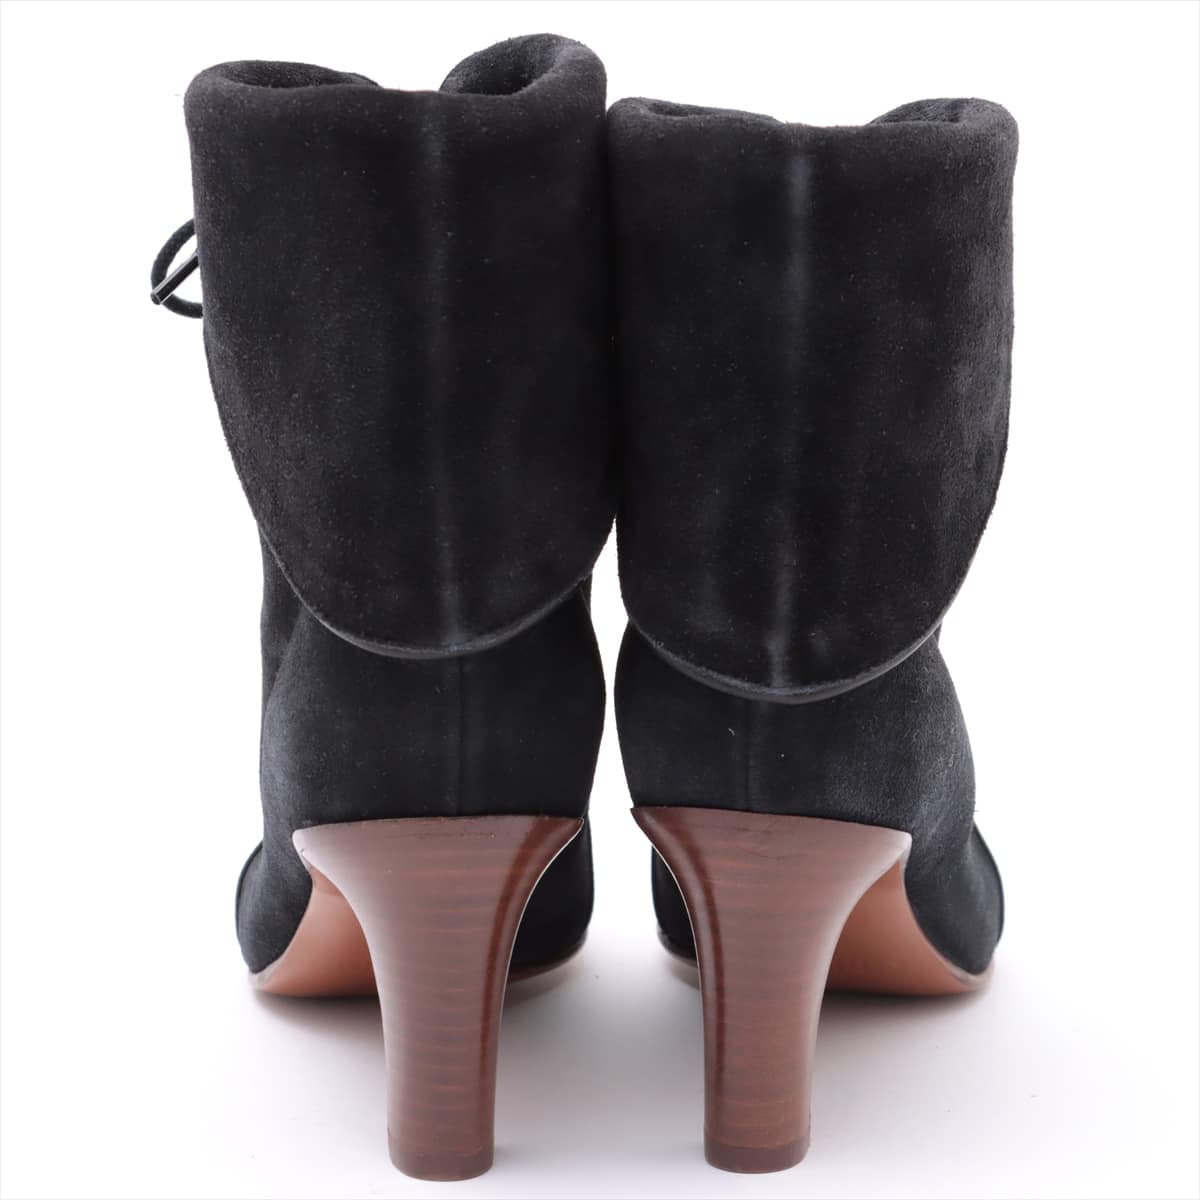 Chloe Leather & suede Short Boots 36 Ladies' Black x Gray